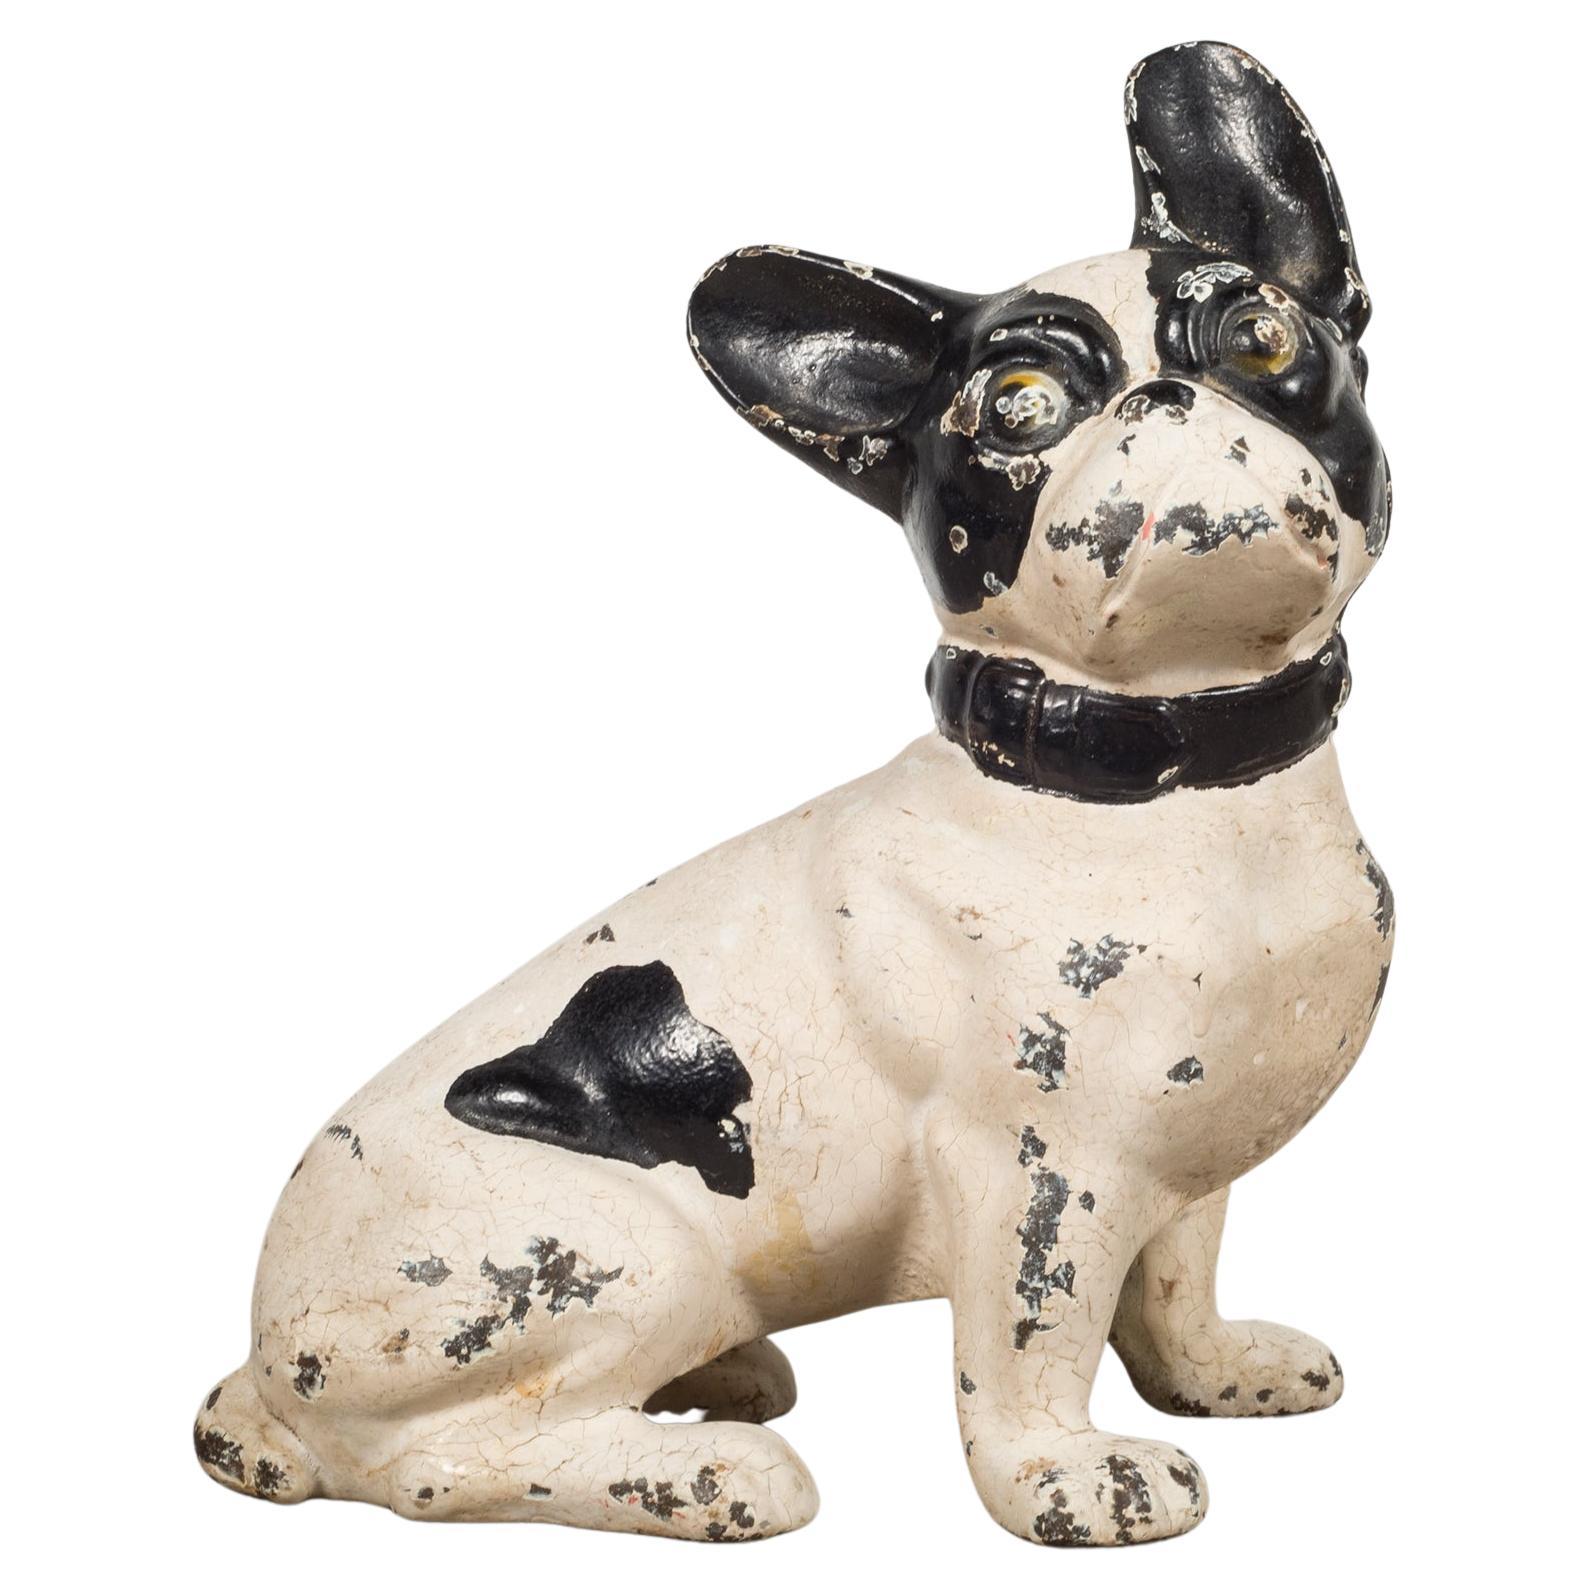 Early 20th Century Cast Iron French Bulldog Doorstop by Hubley, c. 1910- 1940s